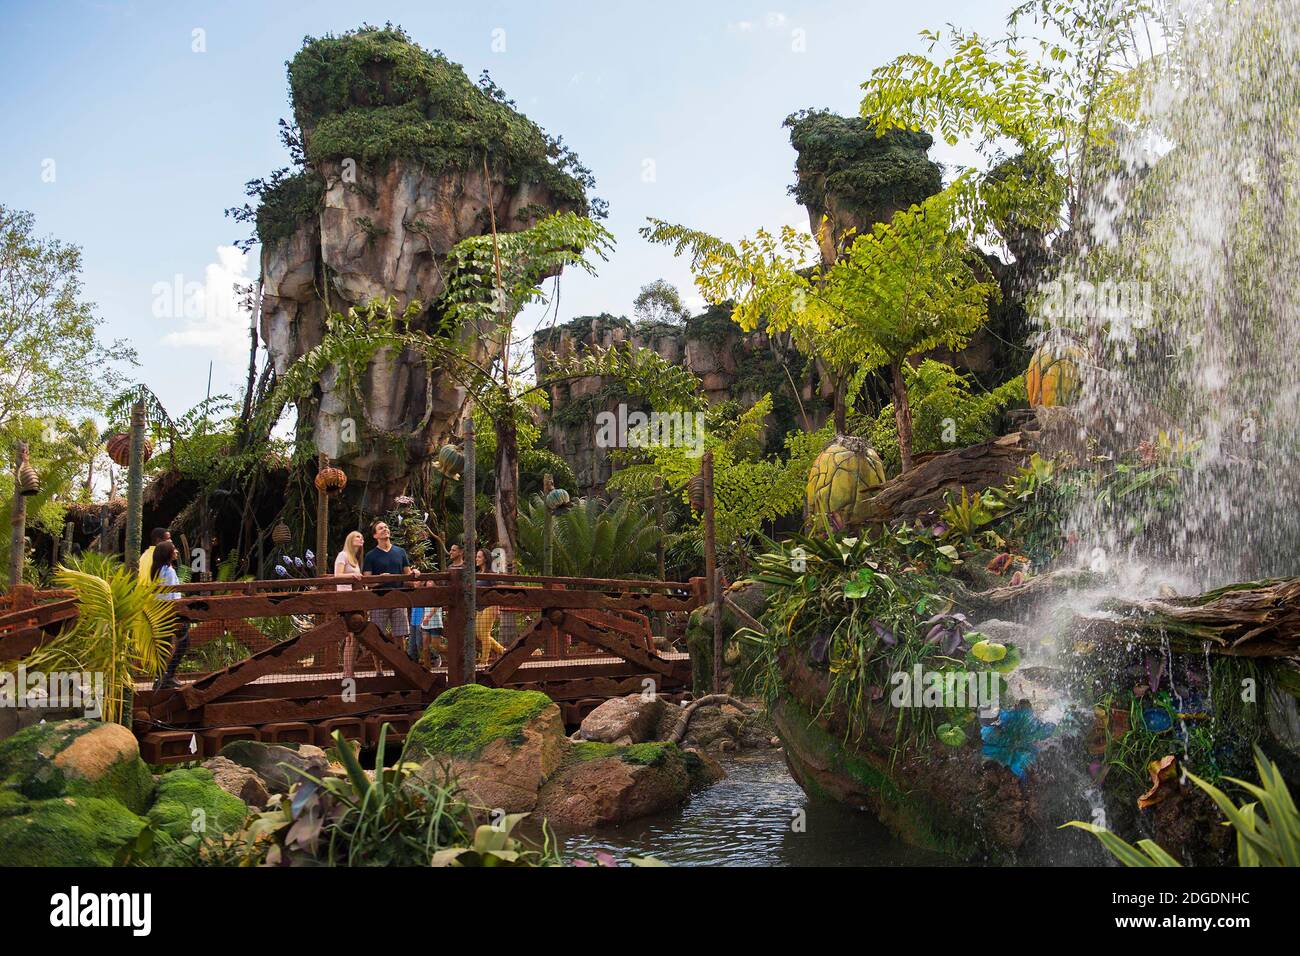 Hand out photo - Pandora - The World of Avatar at Disney's Animal Kingdom brings a variety of experiences to the park, including the family friendly Na'vi River Journey attraction, the thrilling Flight of Passage attraction, as well as new food, beverage and merchandise locations. Disney's Animal Kingdom is one of four theme parks at Walt Disney World Resort in Lake Buena Vista, FL, USA, May 24, 2017. Photo by Disney via ABACAPRESS.COM Stock Photo